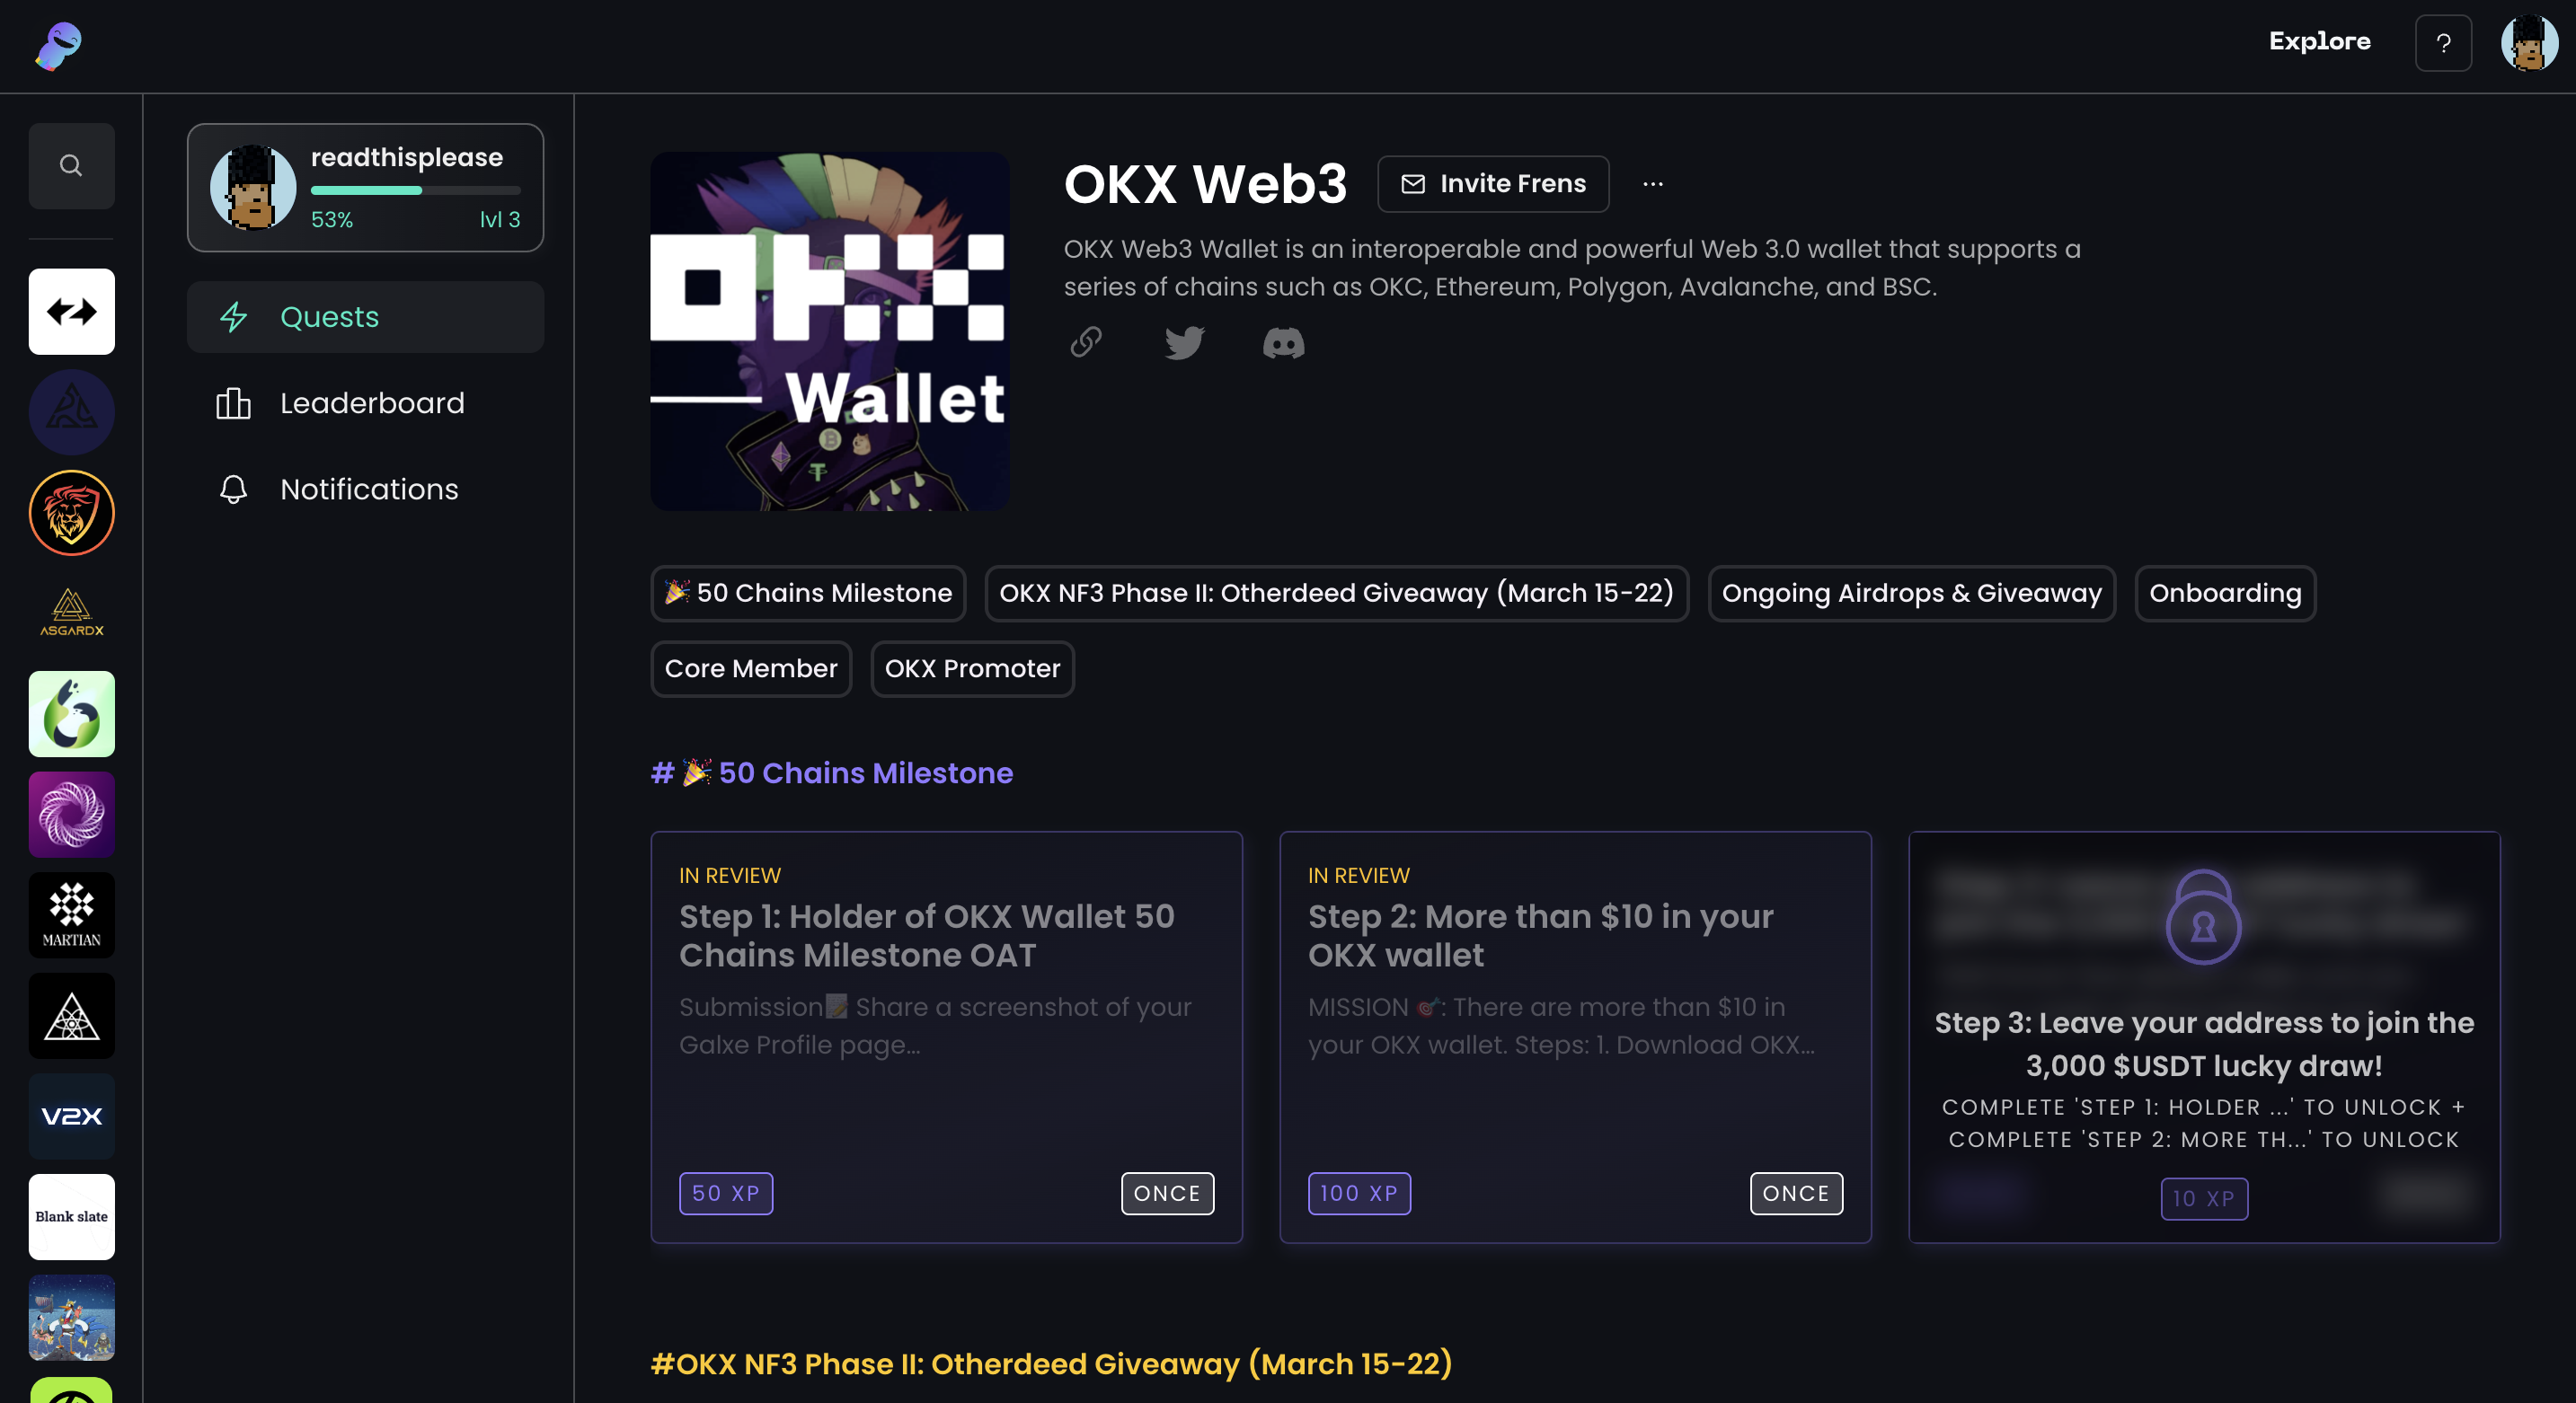 @readthisplease/okx-wallet-crew-quest-you-should-consider-participating